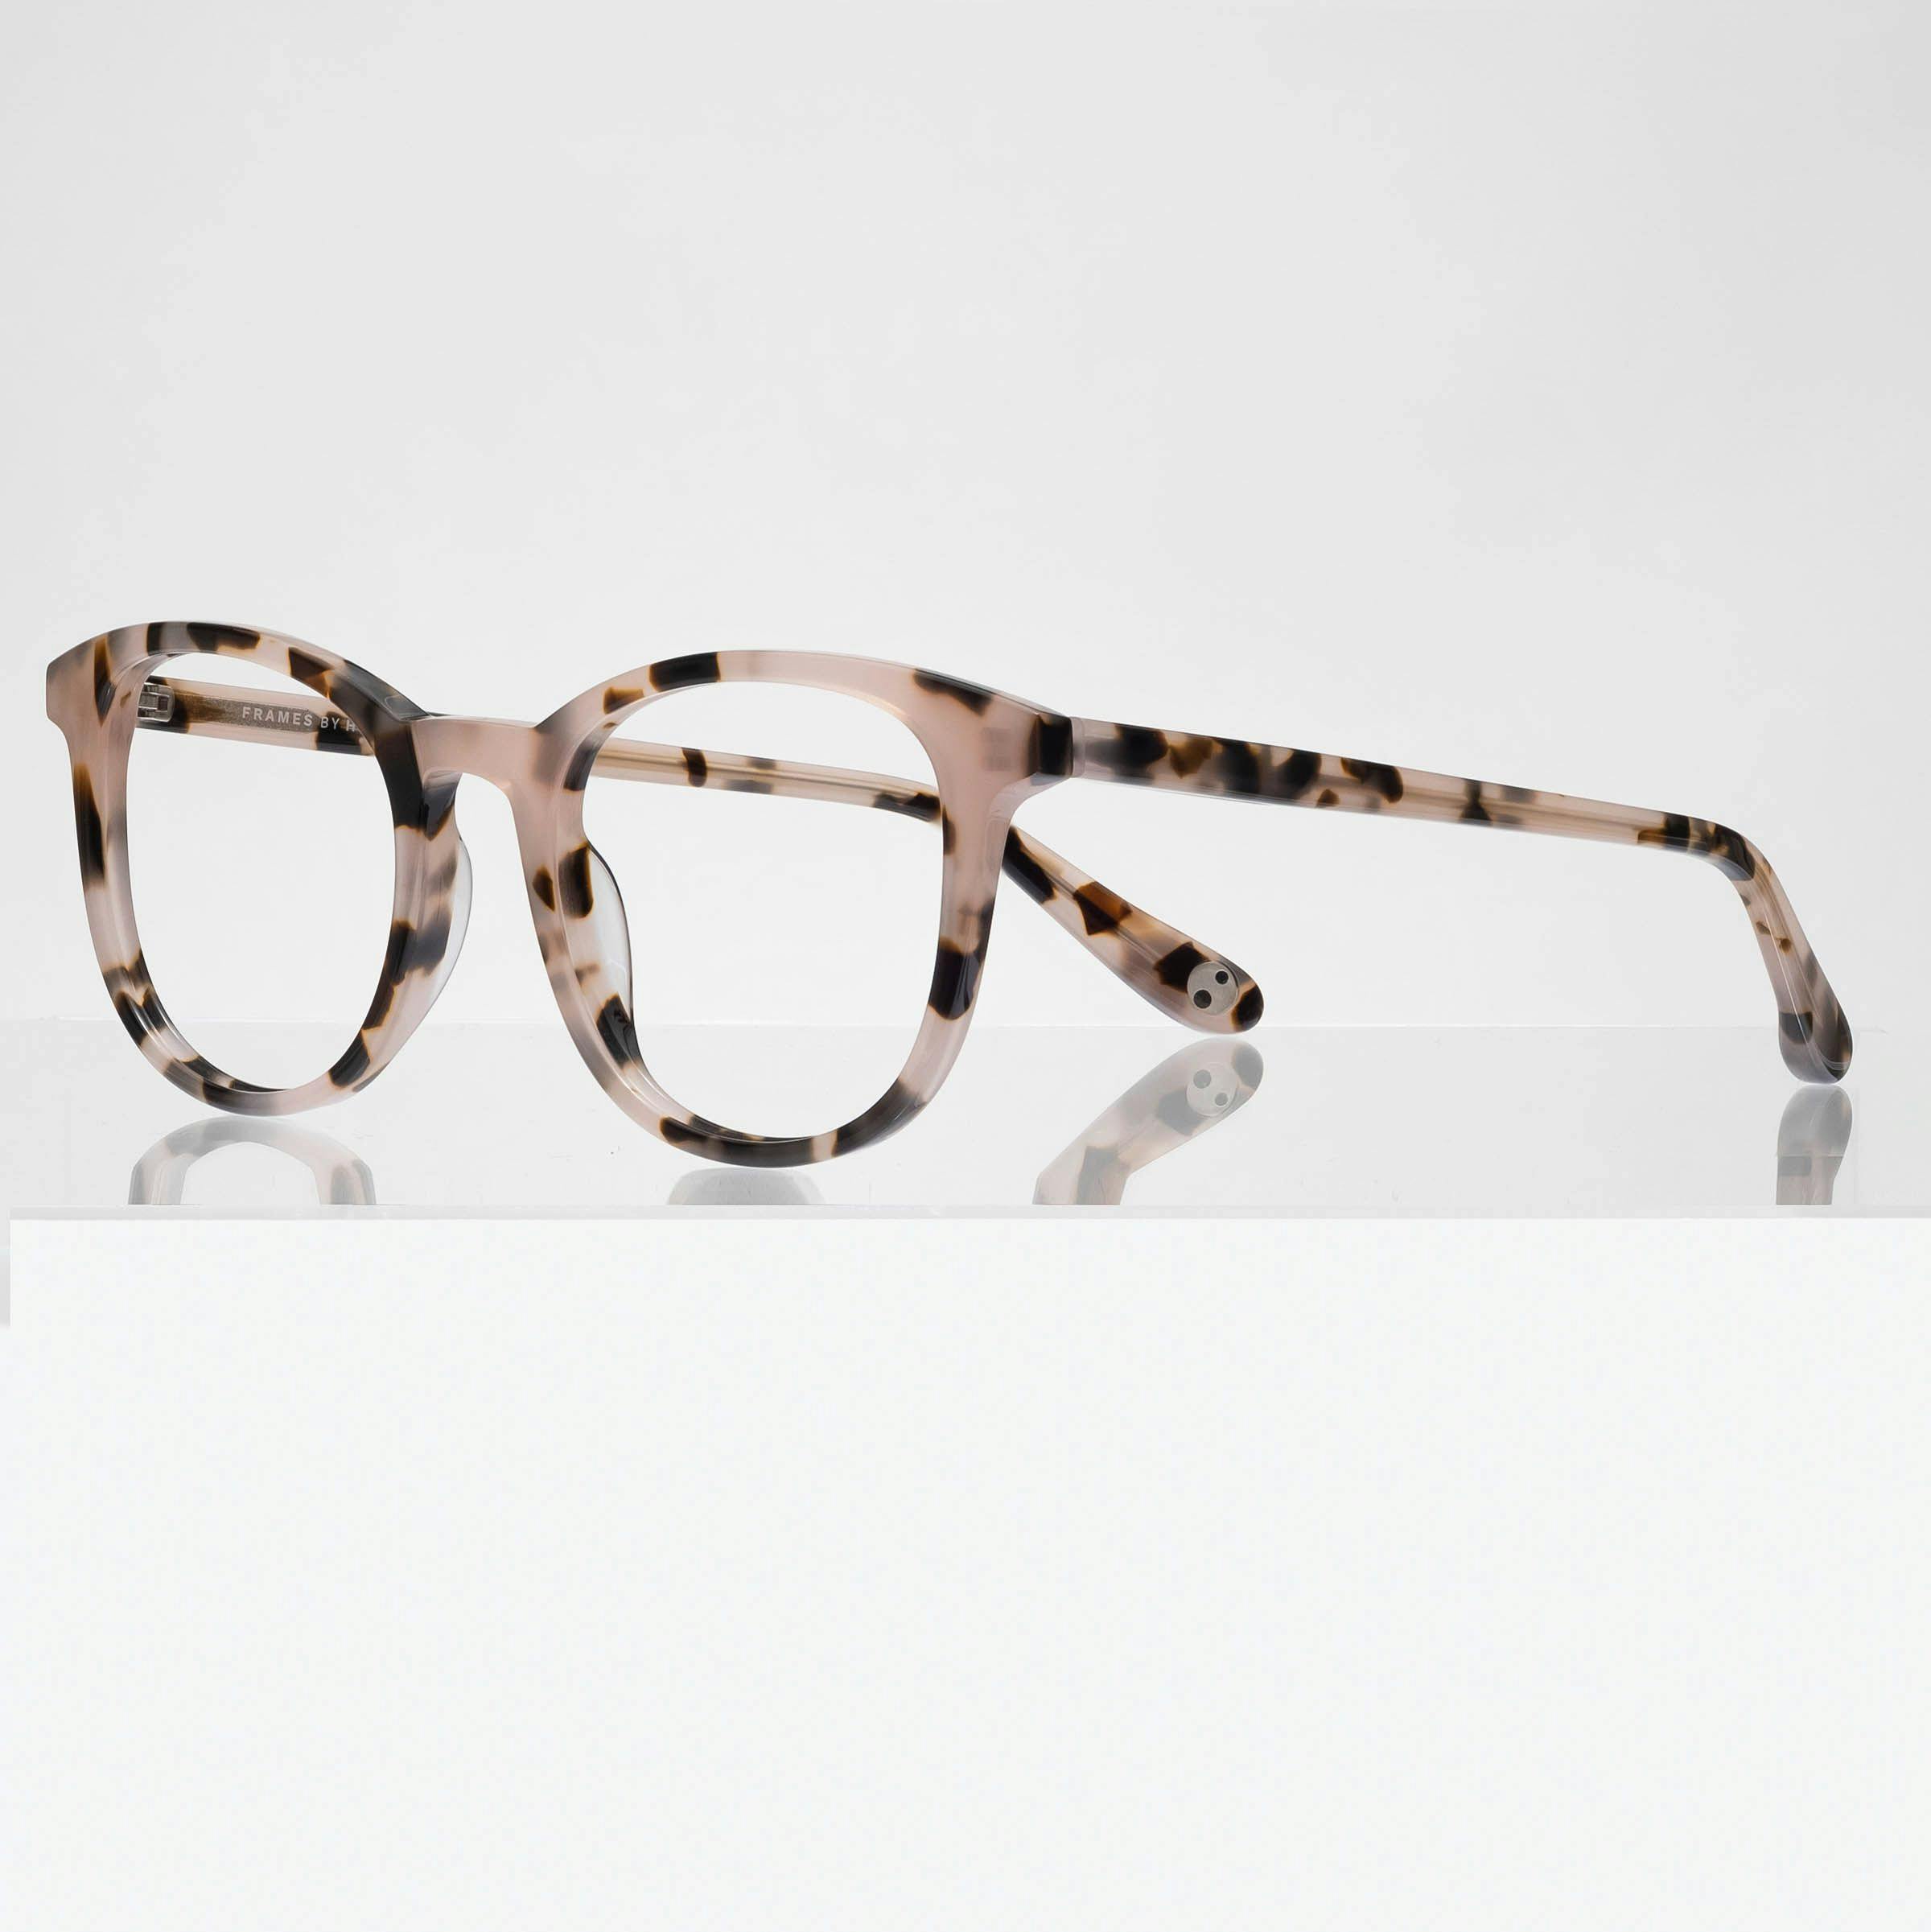 Astrid is a medium, feminine, acetate frame that includes prescription lenses. It is available in blush tortoise, black tortoise and champagne crystal color options.